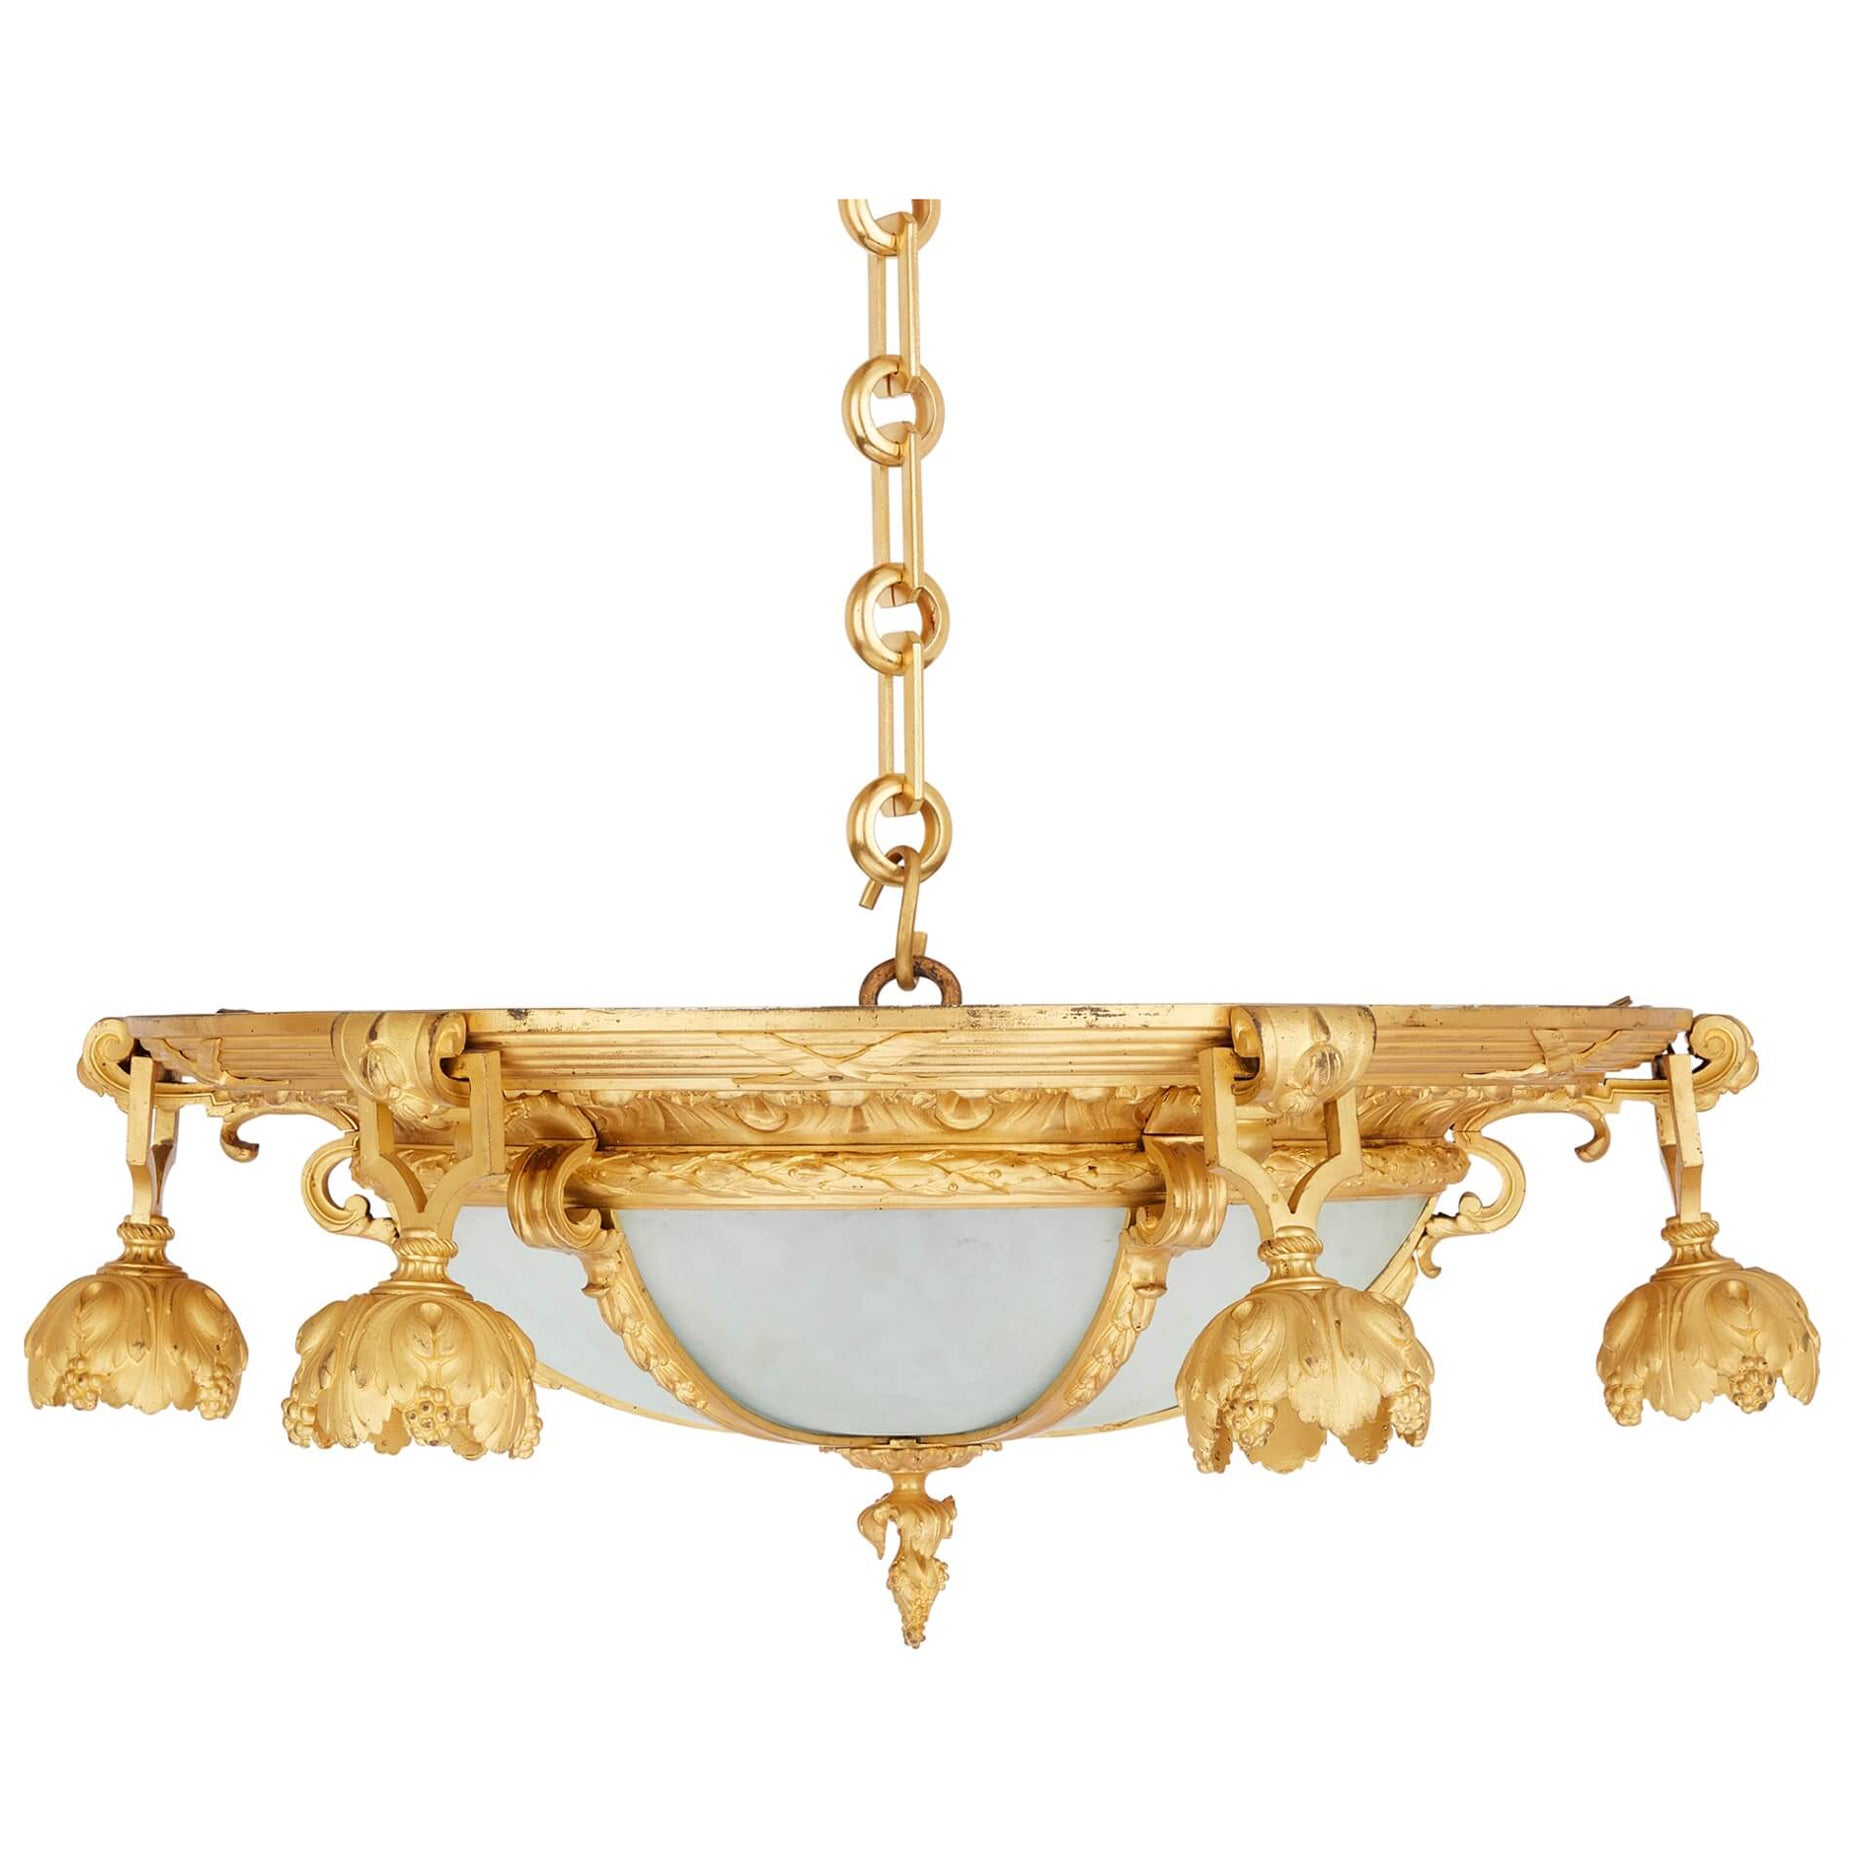 19th Century French Gilt Bronze and Glass Six-Light Chandelier For Sale